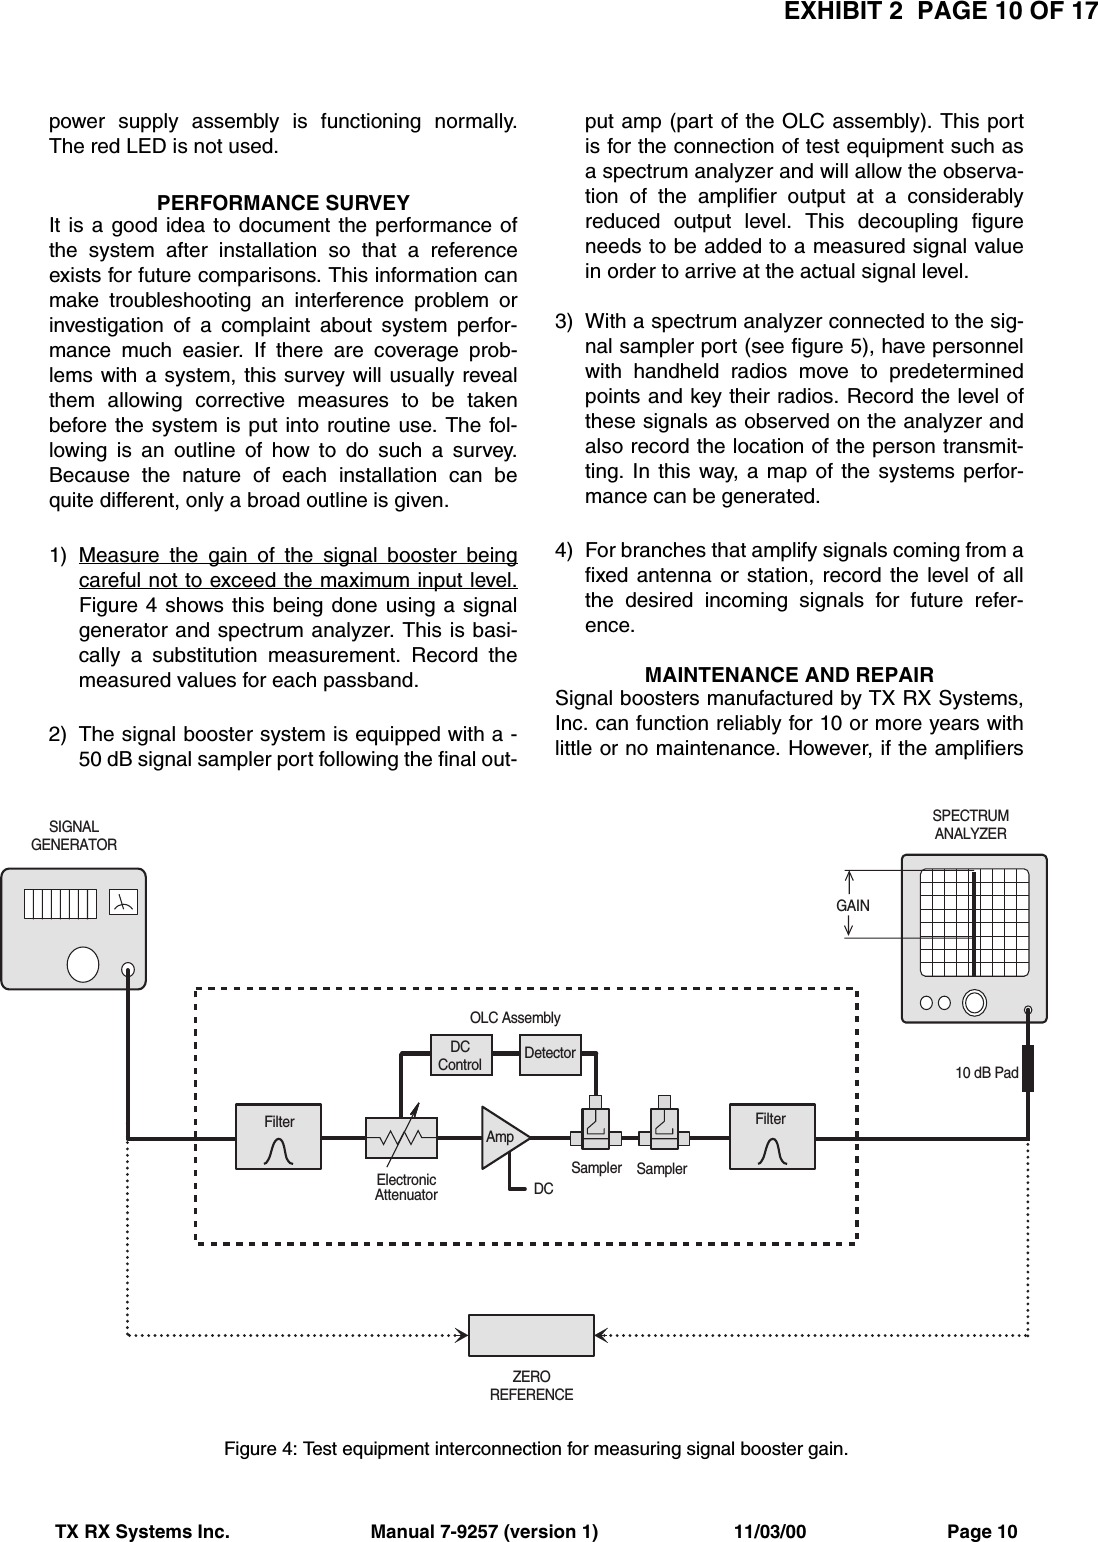 EXHIBIT 2  PAGE 10 OF 17TX RX Systems Inc.                           Manual 7-9257 (version 1)                          11/03/00                           Page 10power supply assembly is functioning normally.The red LED is not used.PERFORMANCE SURVEYIt is a good idea to document the performance ofthe system after installation so that a referenceexists for future comparisons. This information canmake troubleshooting an interference problem orinvestigation of a complaint about system perfor-mance much easier. If there are coverage prob-lems with a system, this survey will usually revealthem allowing corrective measures to be takenbefore the system is put into routine use. The fol-lowing is an outline of how to do such a survey.Because the nature of each installation can bequite different, only a broad outline is given.1) Measure the gain of the signal booster beingcareful not to exceed the maximum input level.Figure 4 shows this being done using a signalgenerator and spectrum analyzer. This is basi-cally a substitution measurement. Record themeasured values for each passband.2) The signal booster system is equipped with a -50 dB signal sampler port following the final out-put amp (part of the OLC assembly). This portis for the connection of test equipment such asa spectrum analyzer and will allow the observa-tion of the amplifier output at a considerablyreduced output level. This decoupling figureneeds to be added to a measured signal valuein order to arrive at the actual signal level.3) With a spectrum analyzer connected to the sig-nal sampler port (see figure 5), have personnelwith handheld radios move to predeterminedpoints and key their radios. Record the level ofthese signals as observed on the analyzer andalso record the location of the person transmit-ting. In this way, a map of the systems perfor-mance can be generated.4) For branches that amplify signals coming from afixed antenna or station, record the level of allthe desired incoming signals for future refer-ence.MAINTENANCE AND REPAIRSignal boosters manufactured by TX RX Systems,Inc. can function reliably for 10 or more years withlittle or no maintenance. However, if the amplifiersDCSampler SamplerDetectorElectronicAttenuatorOLC AssemblyFilter FilterAmpDCControlZEROREFERENCEGAIN10 dB PadSIGNALGENERATORSPECTRUMANALYZERFigure 4: Test equipment interconnection for measuring signal booster gain.